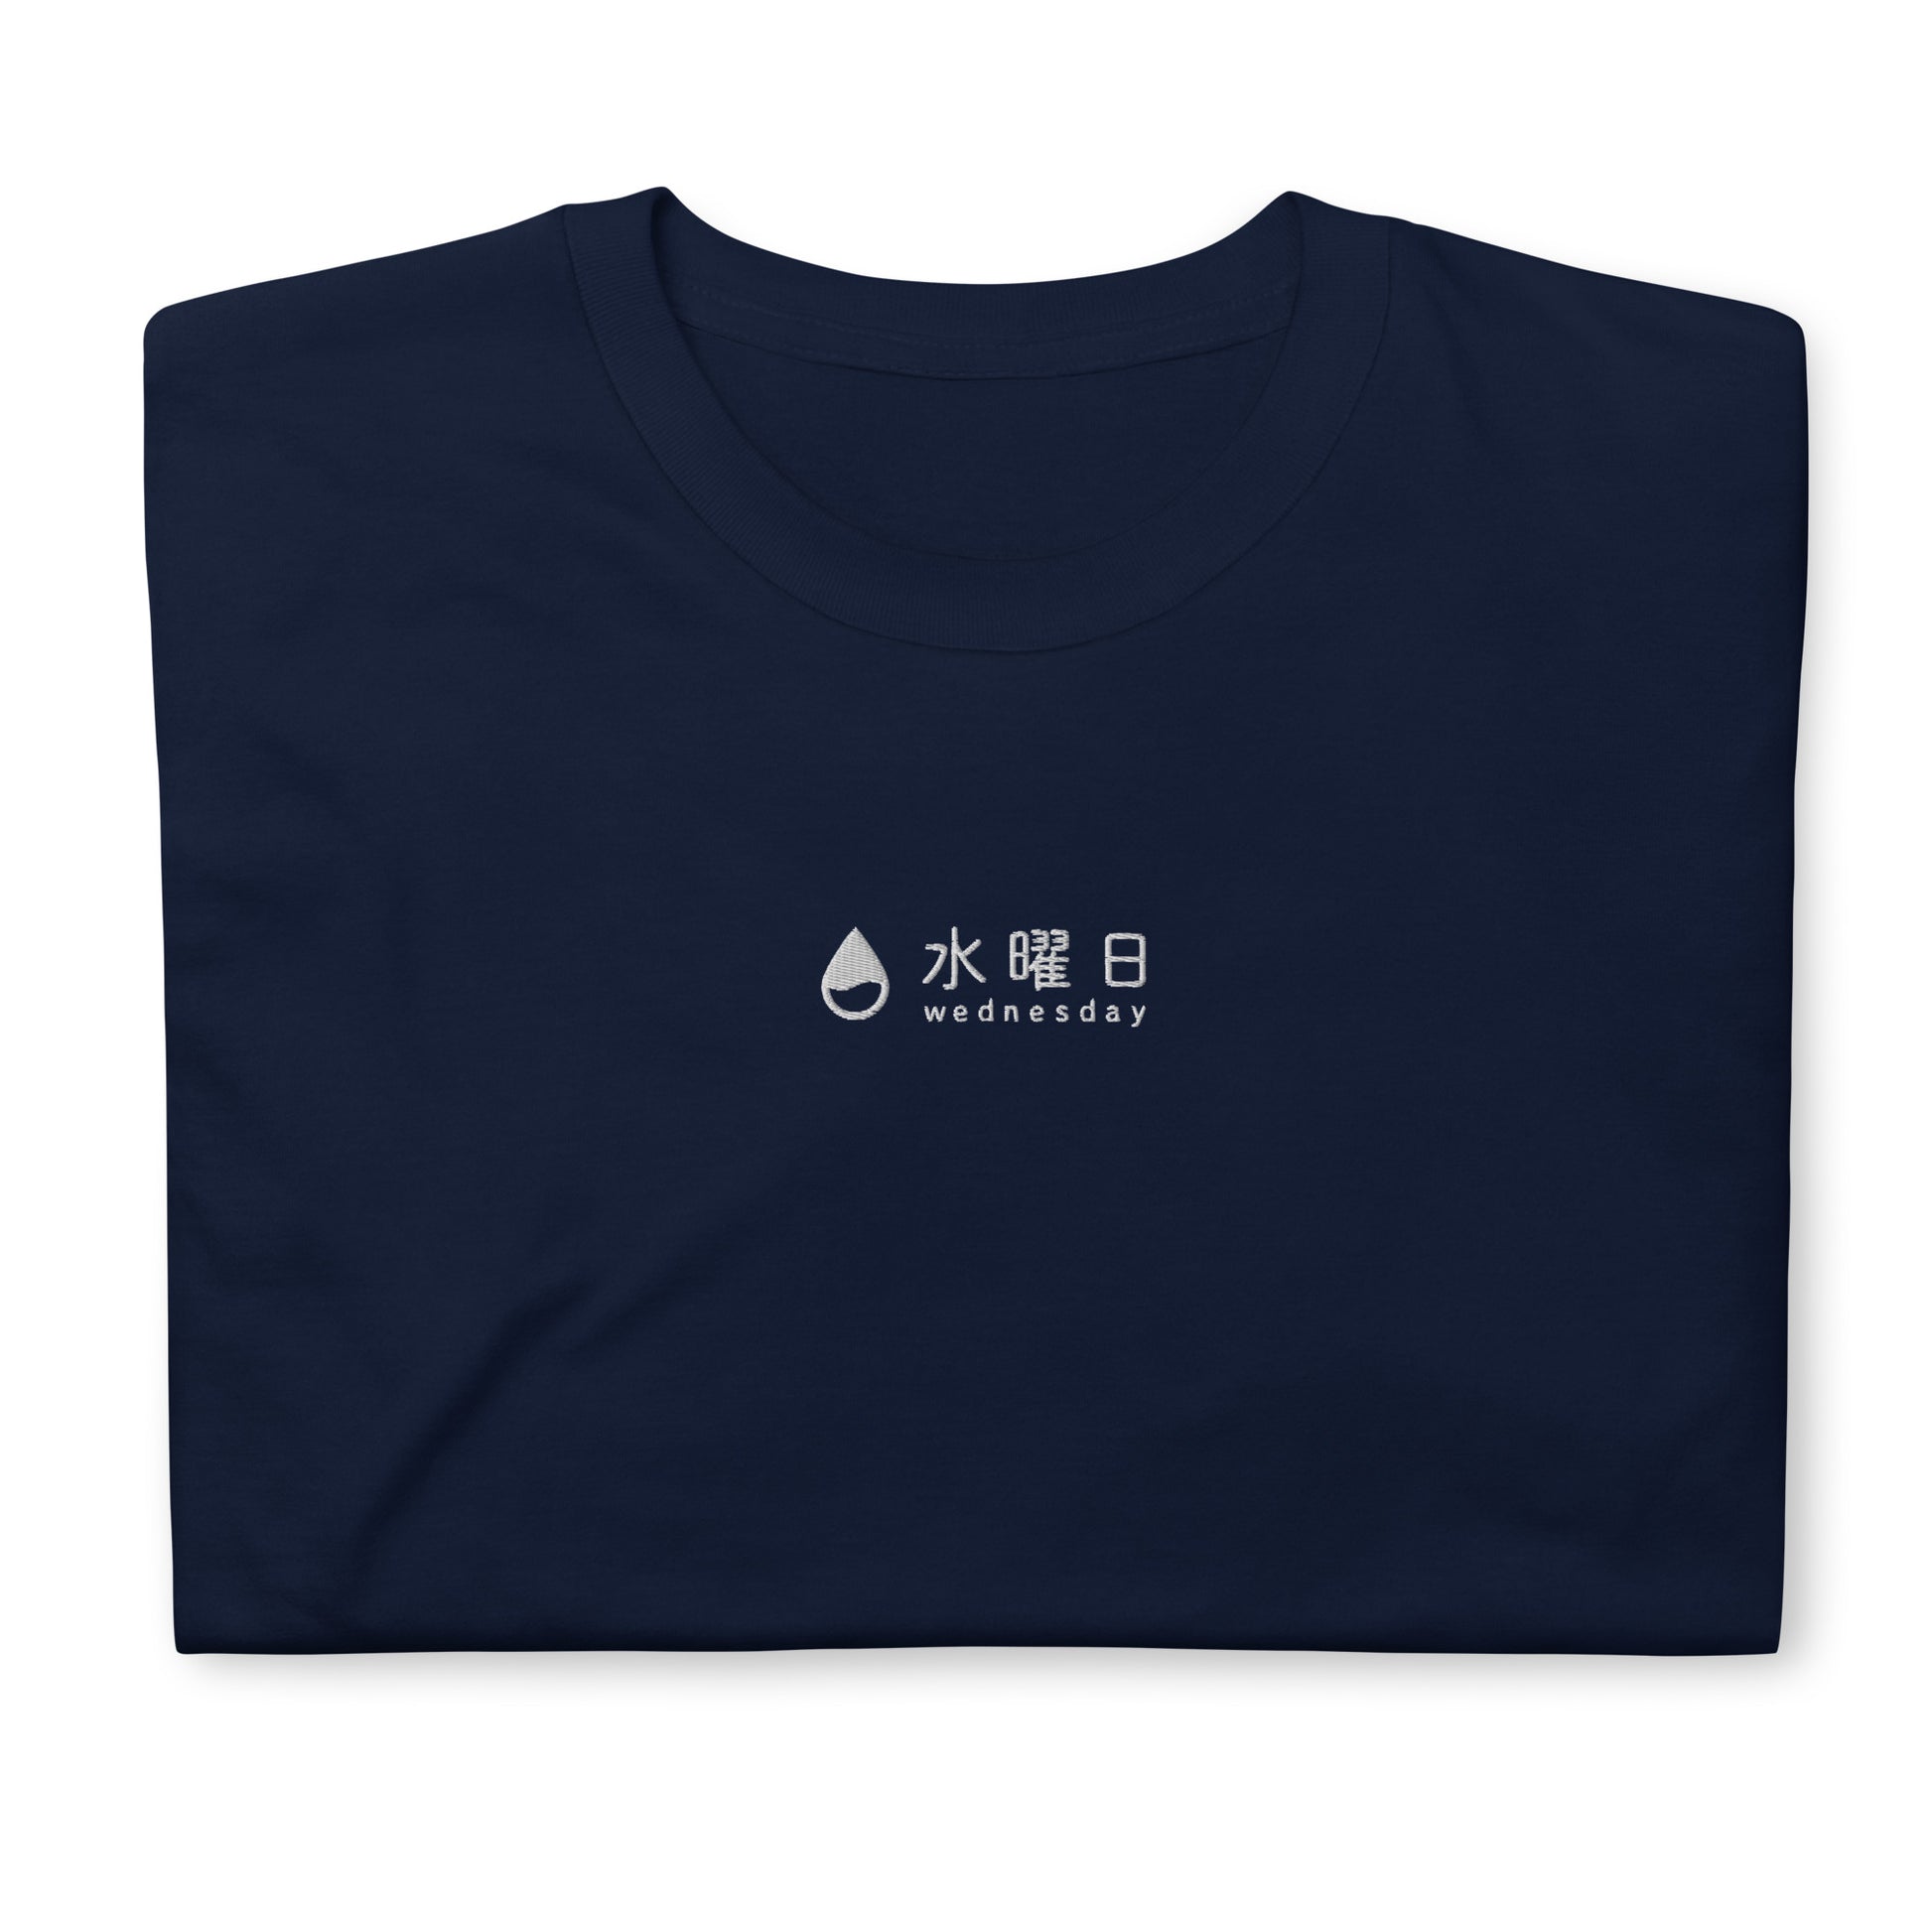 Navy High Quality Tee - Front Design with a white Embroidery "Wednesday" in Japanese and English